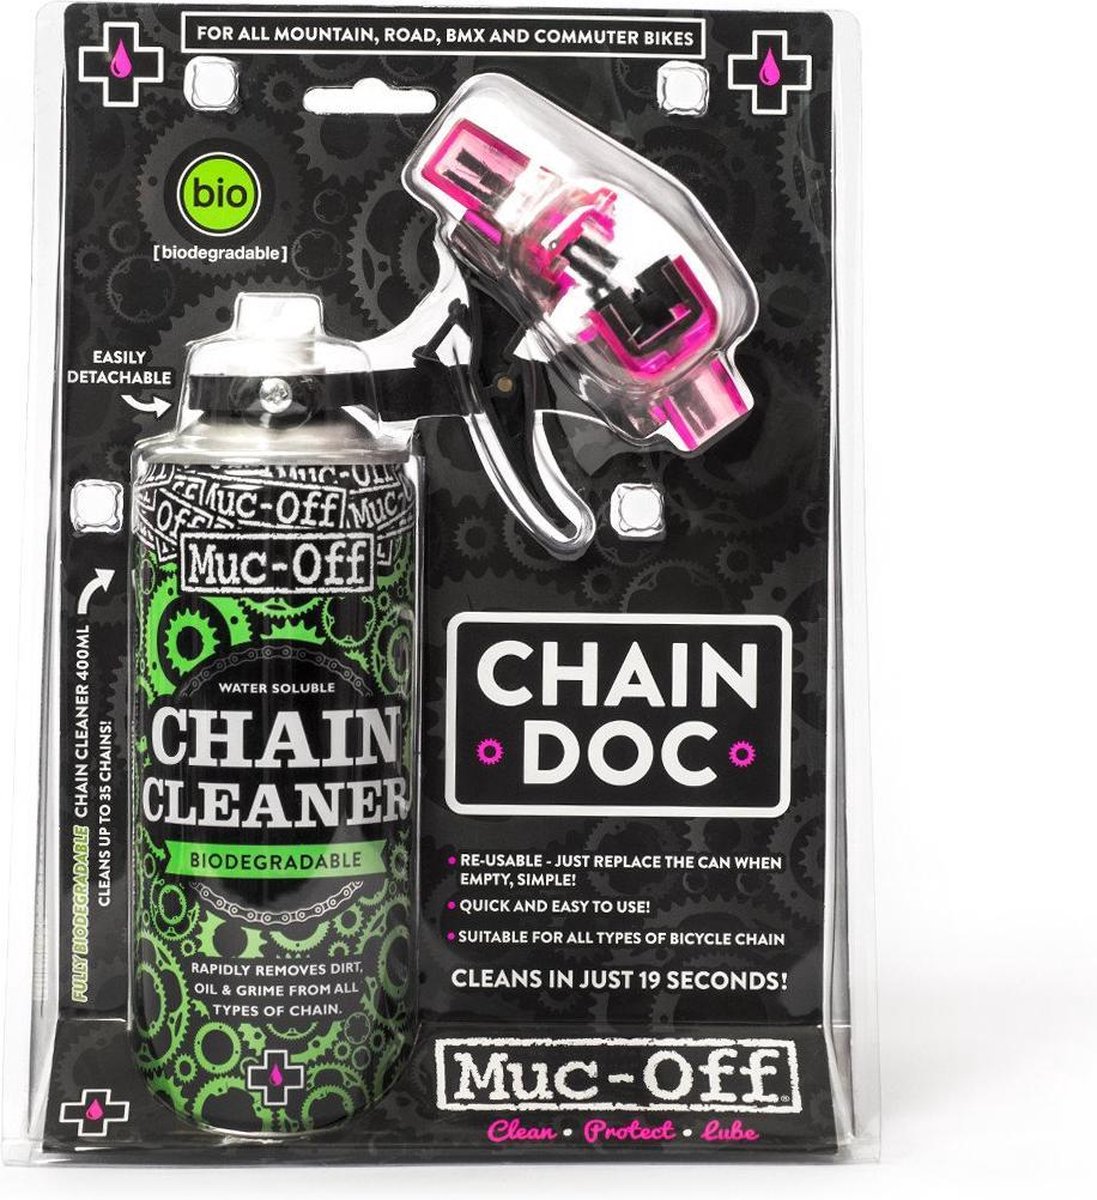 Muc-Off Chain Doc inclusief Chain Cleaner - Muc-Off